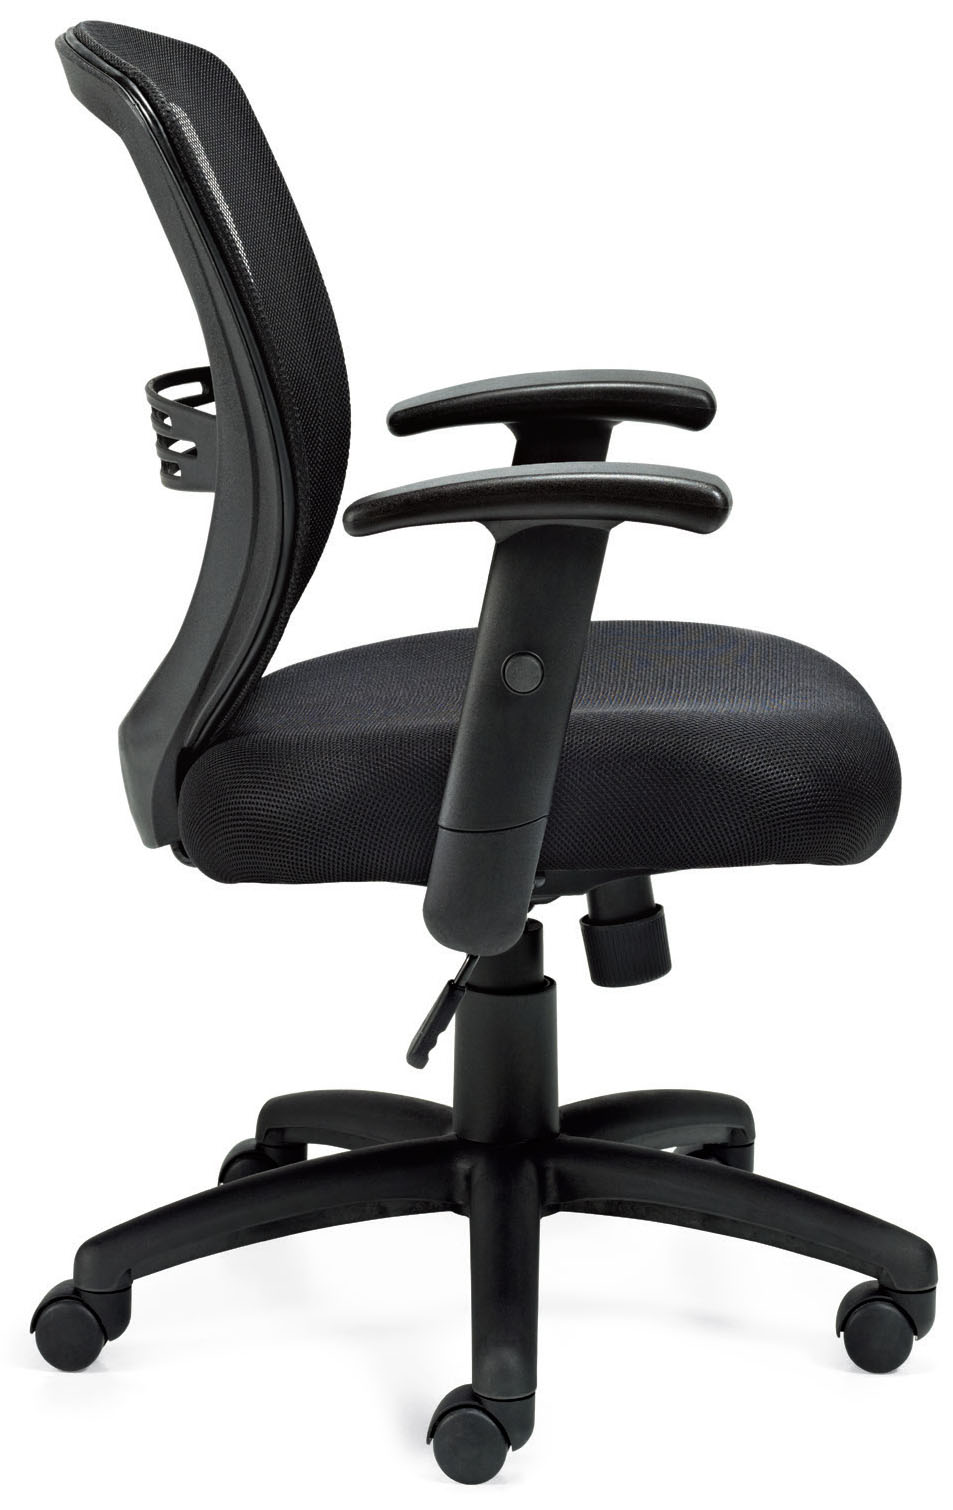 Offices To Go™ Mesh Back Managers Chair, OTG11320B